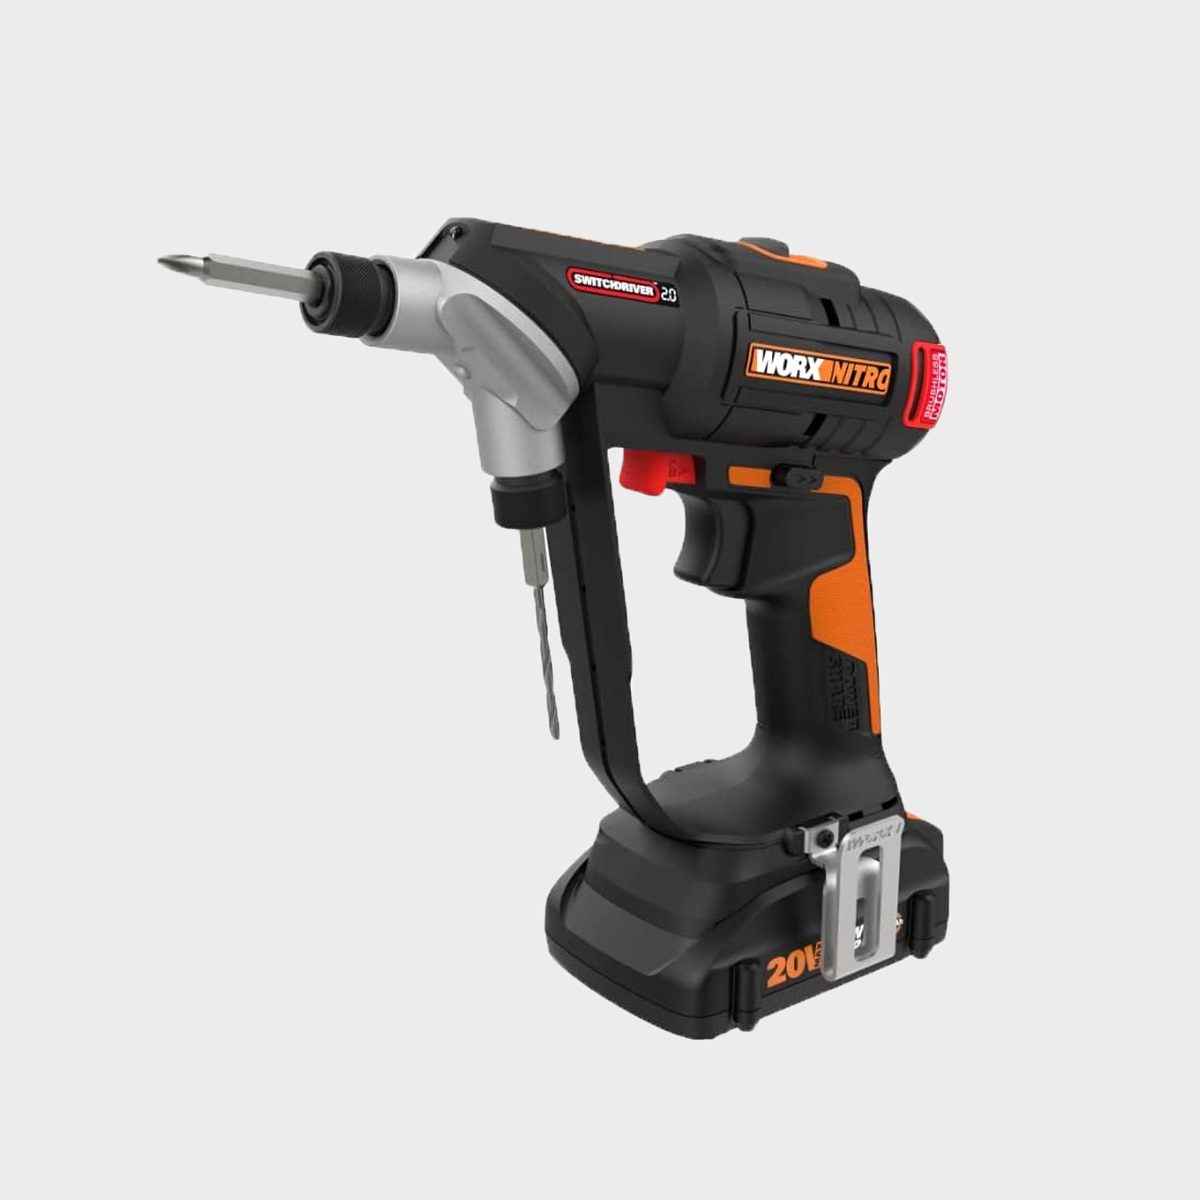 Worx Nitro Wx177l 20v Brushless Switchdriver 2.0 2 In 1 Cordless Drill And Driver Ecomm Amazon.com